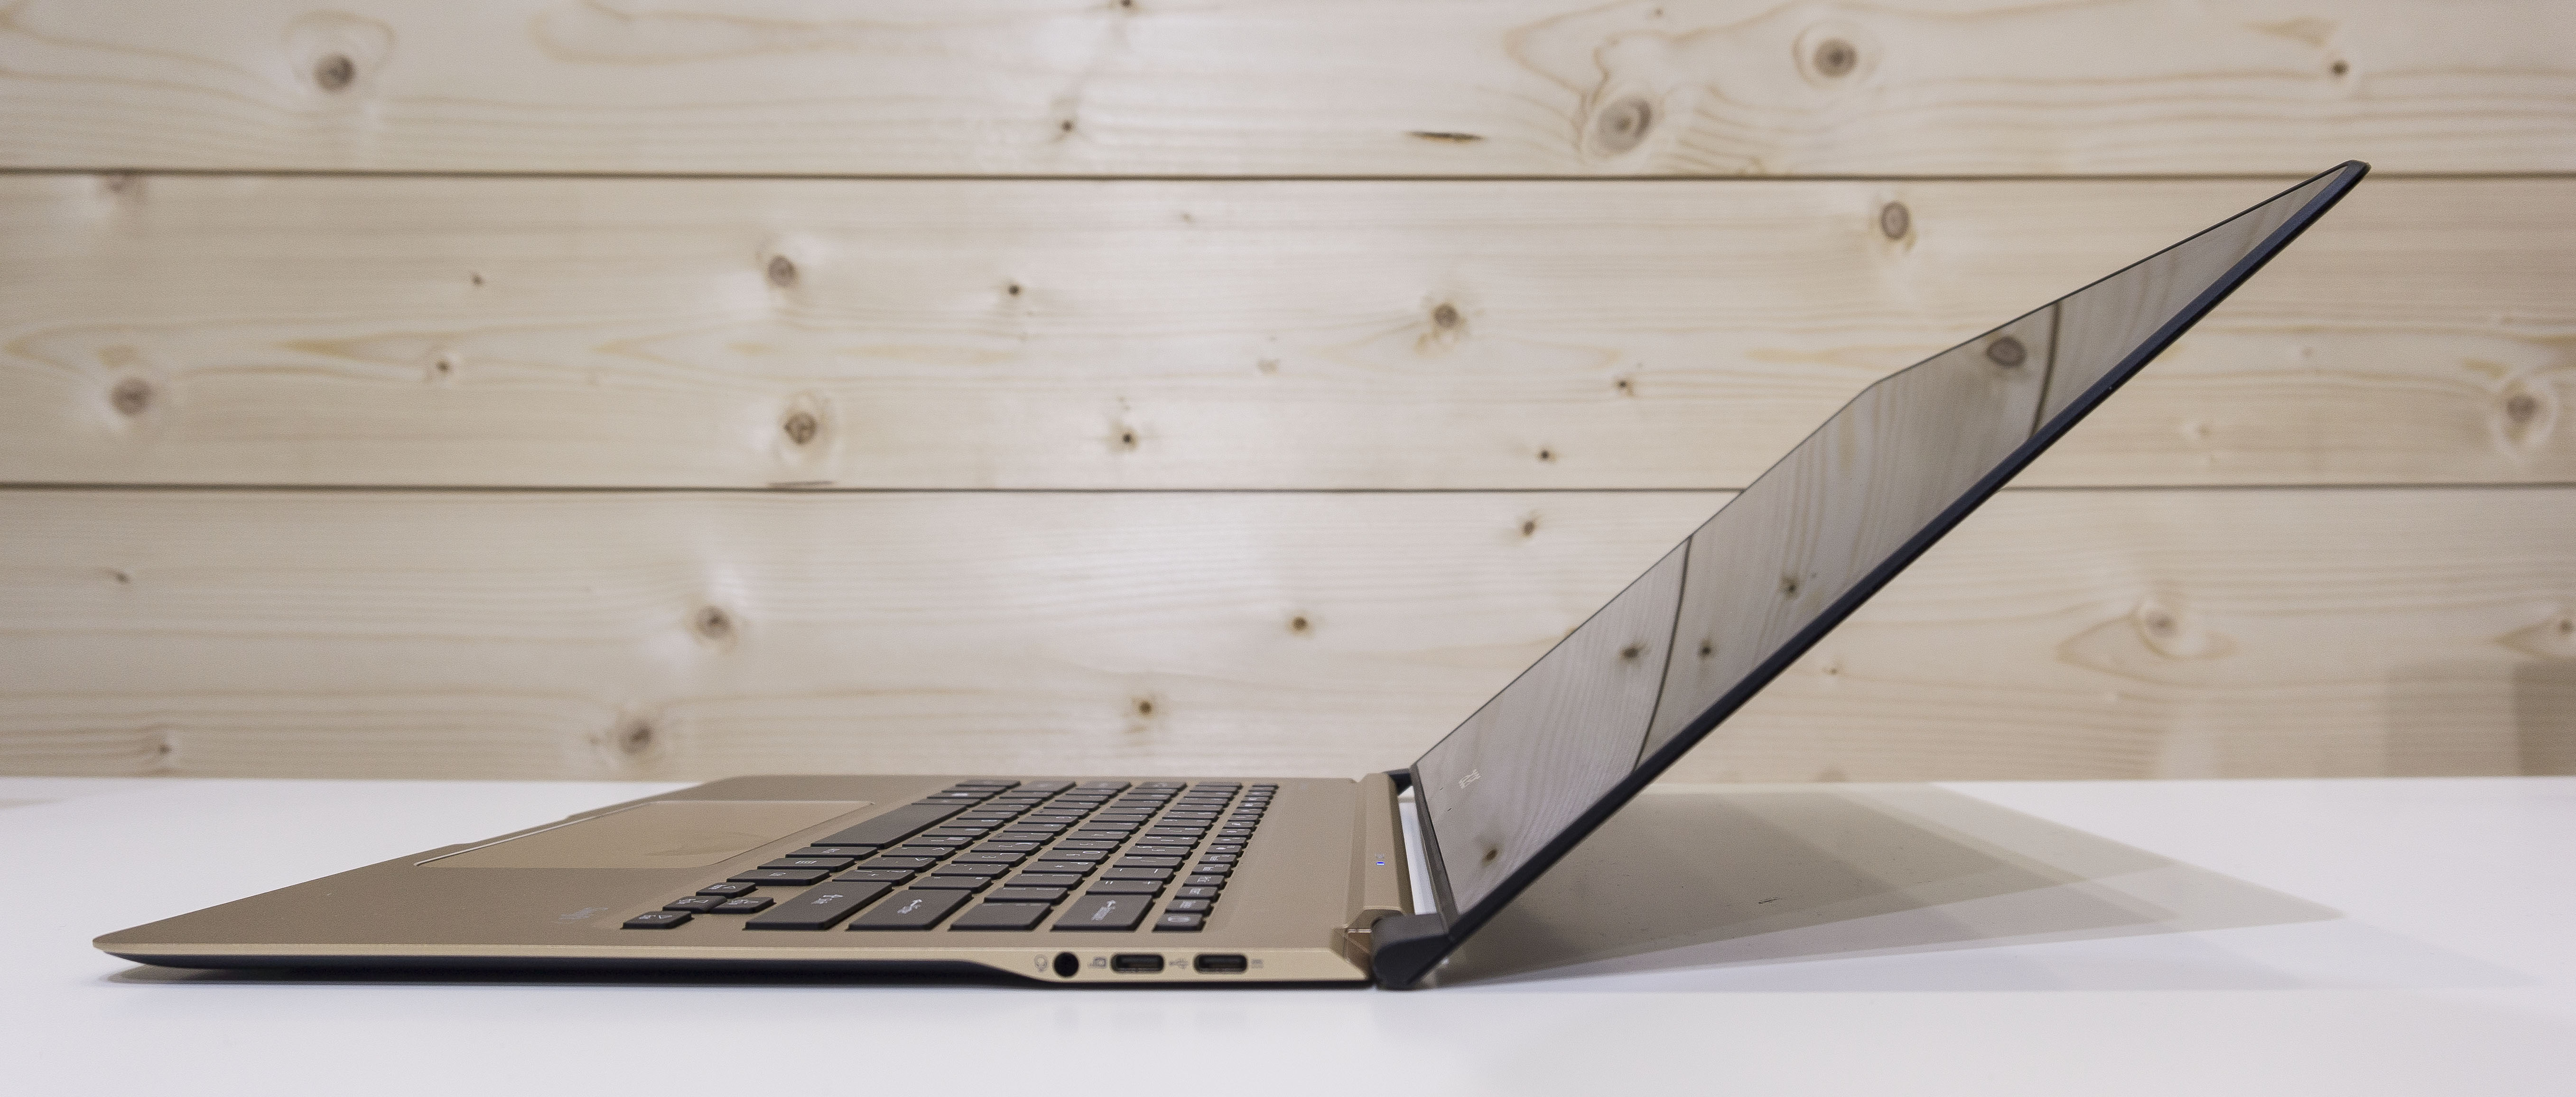 acer swift 7 side EXCLUSIVE: Acer On A Roll As Reviewers Praise Their New Products